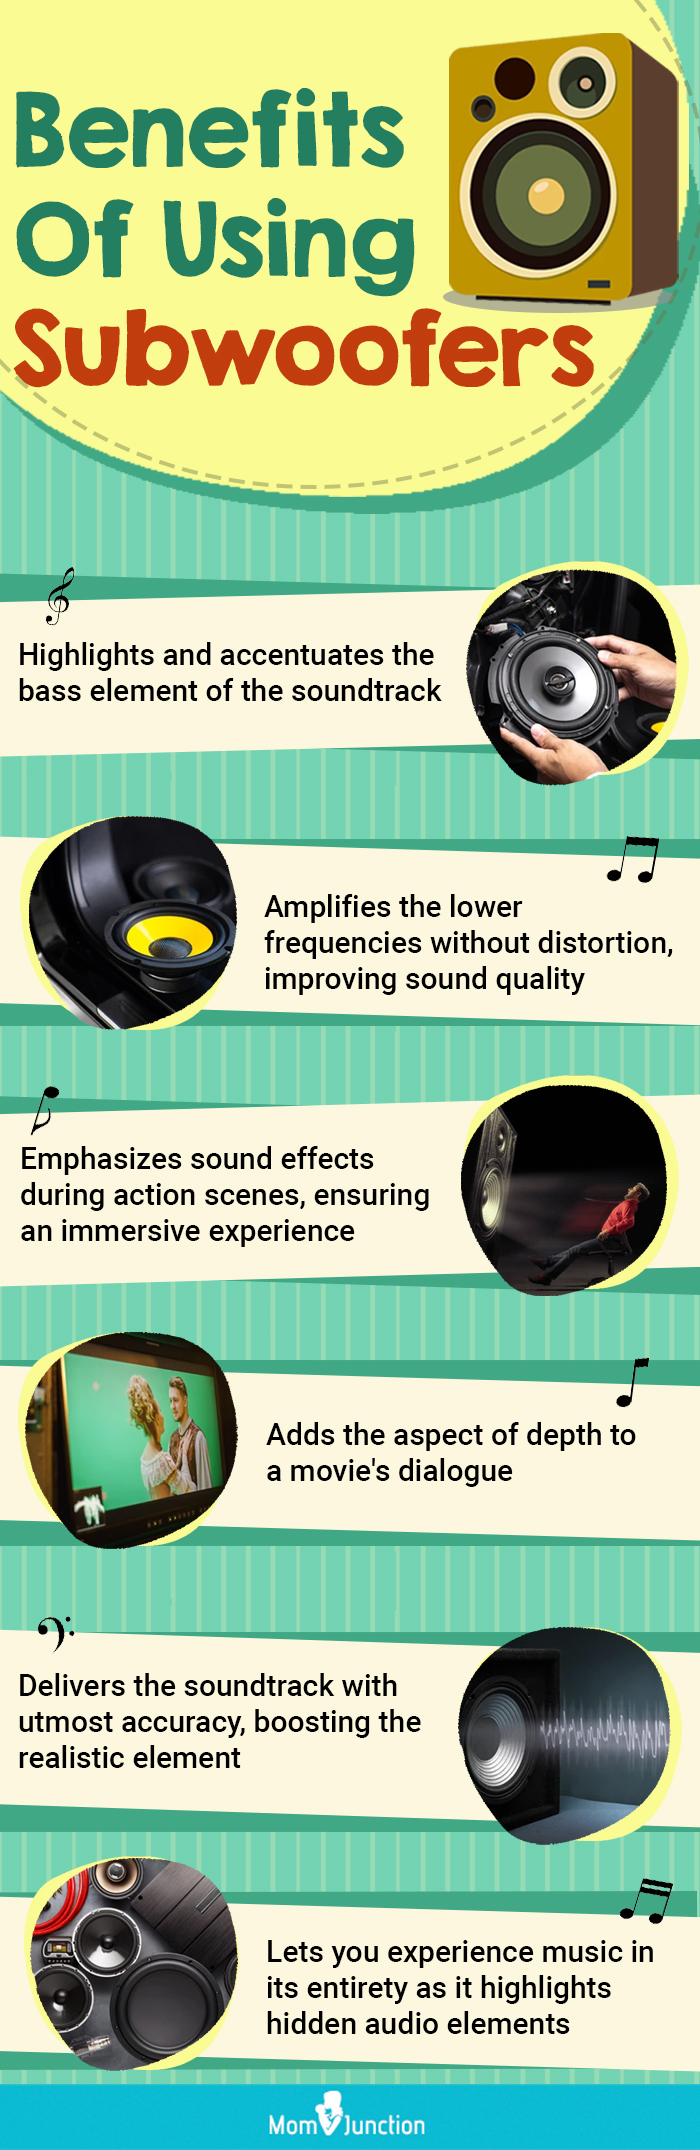 Benefits Of Using Subwoofers (infographic)